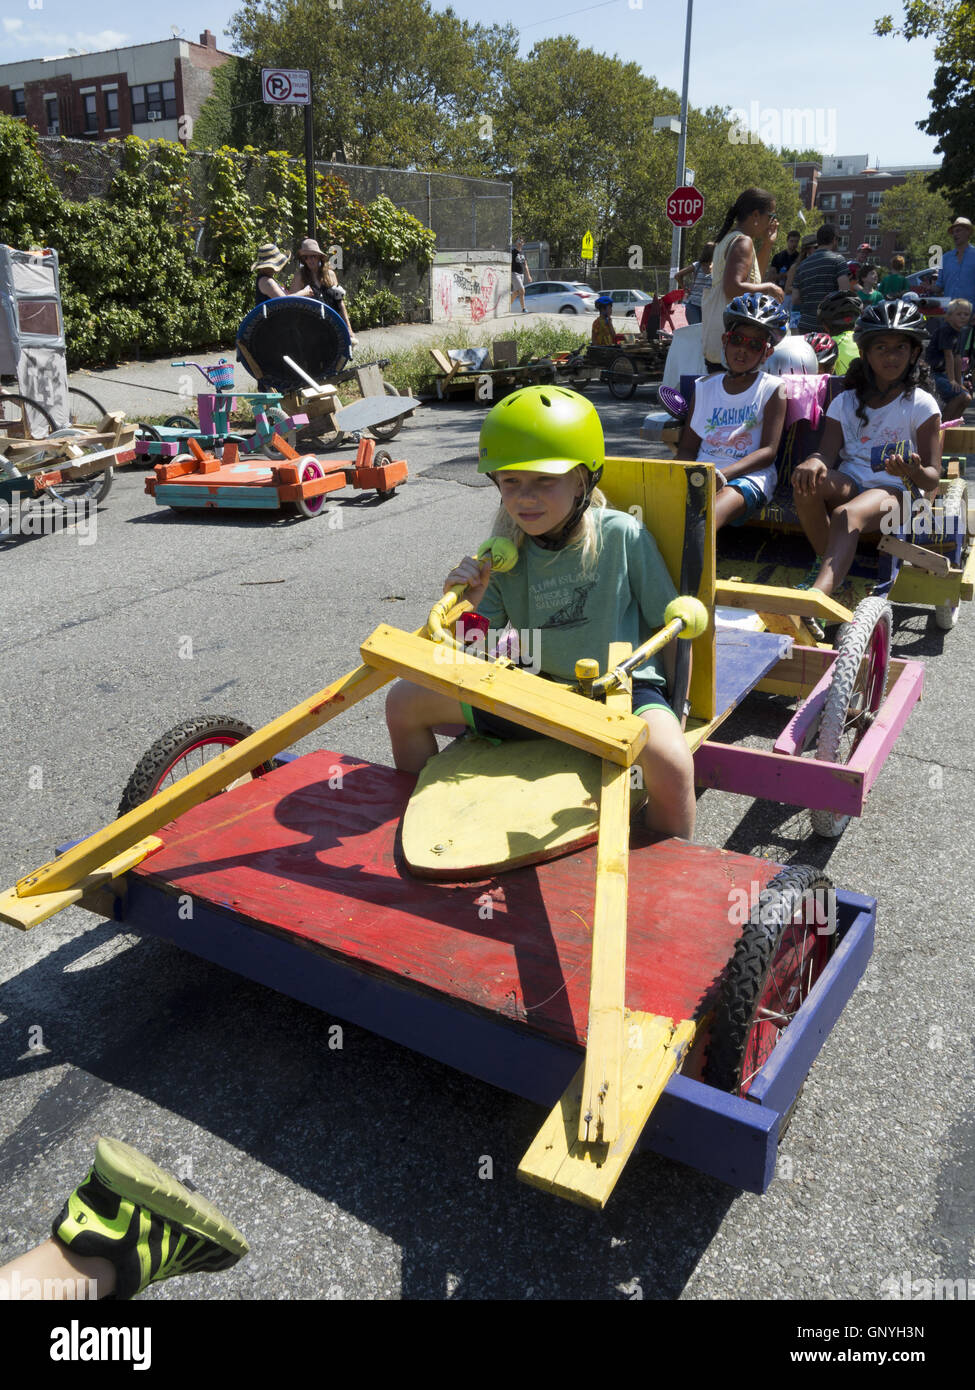 Soap box derby in the Park Slope section of Brooklyn in New York, 2016. Stock Photo